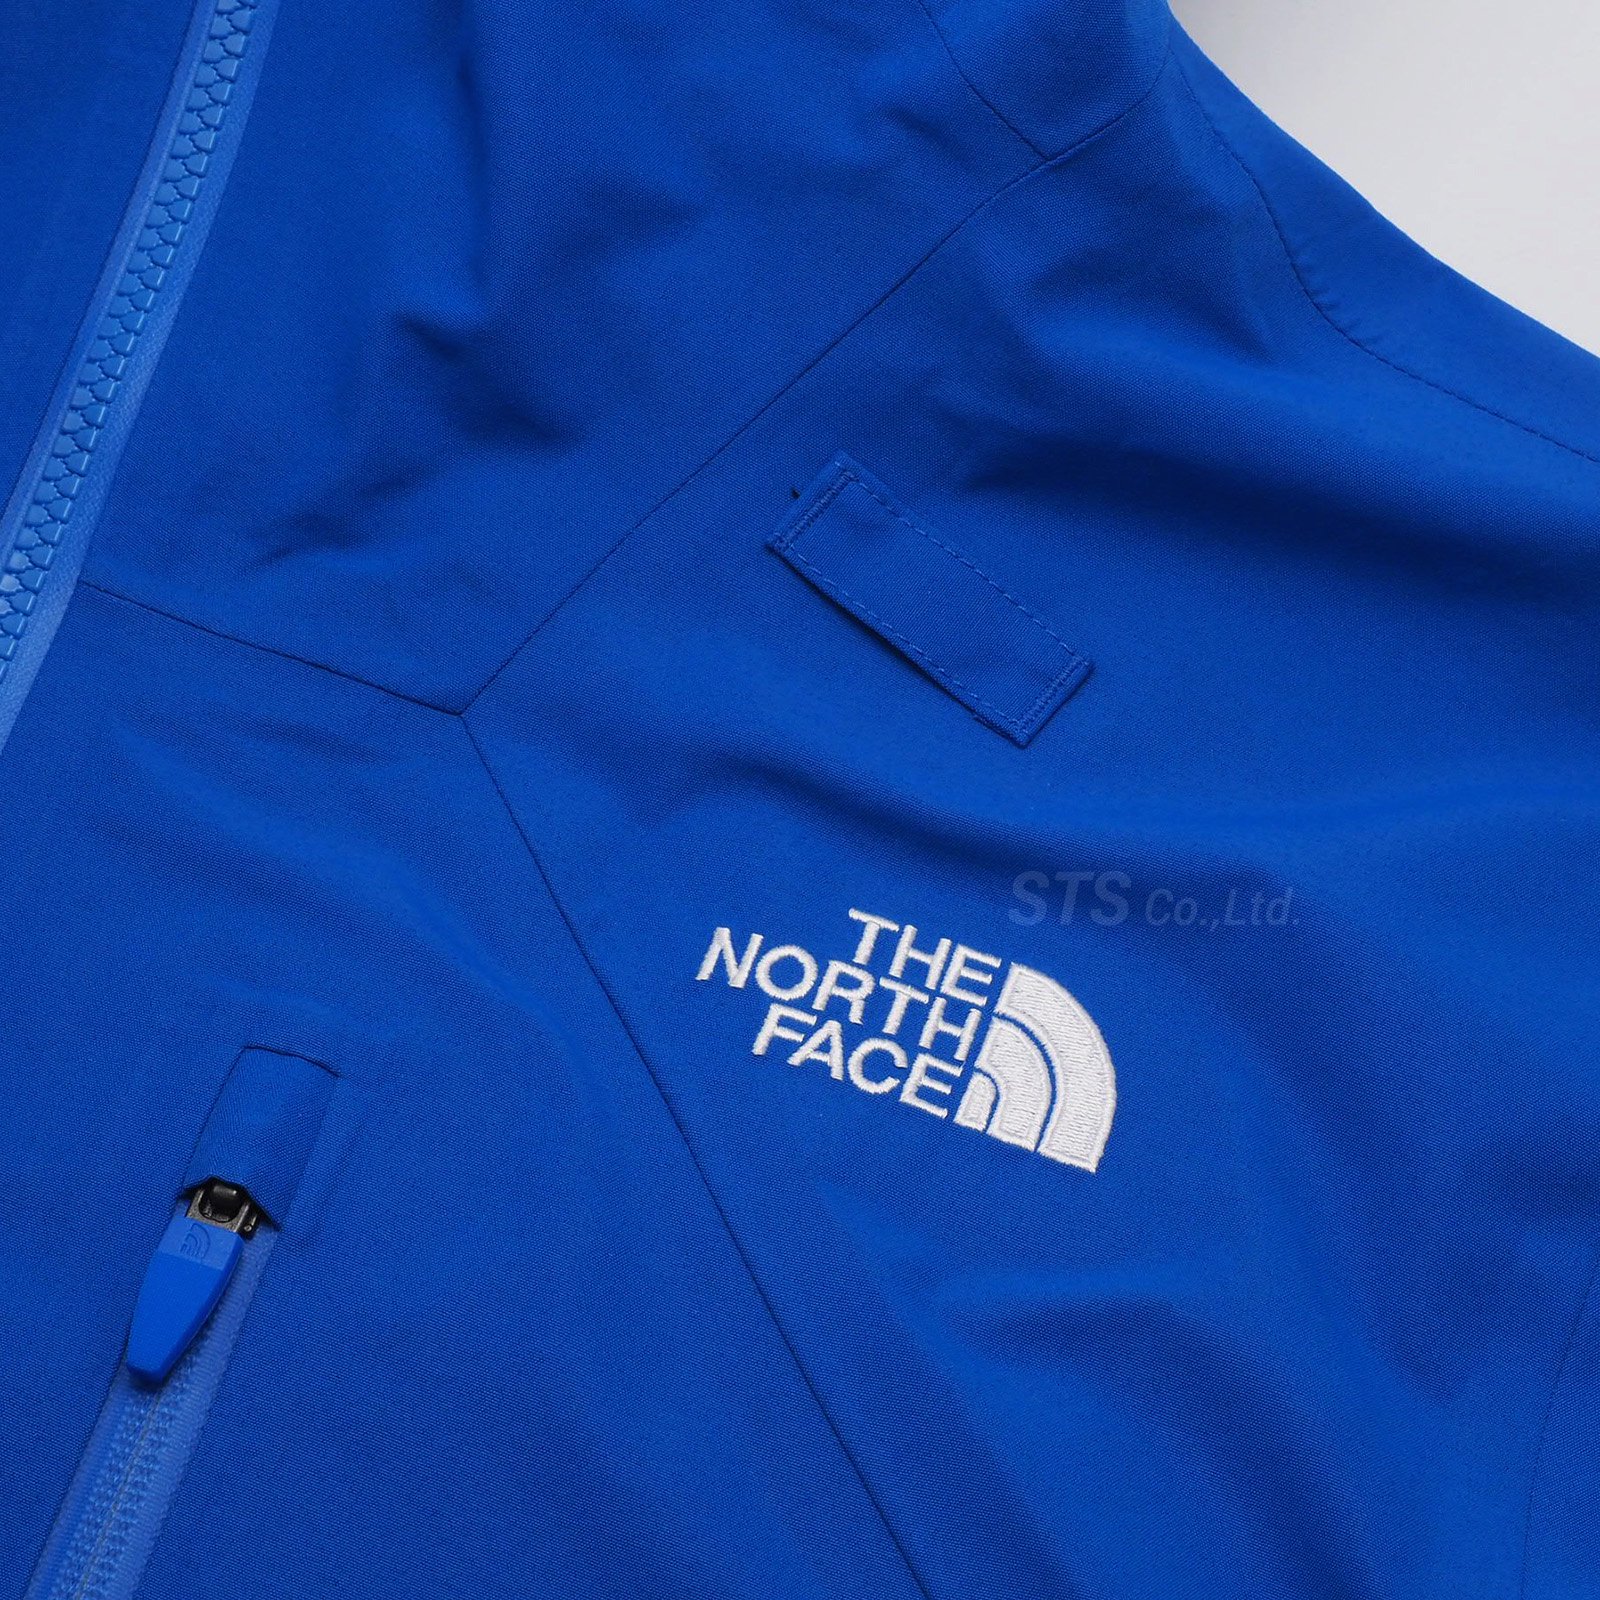 Supreme/The North Face Summit Series Rescue Mountain Pro Jacket - UG.SHAFT